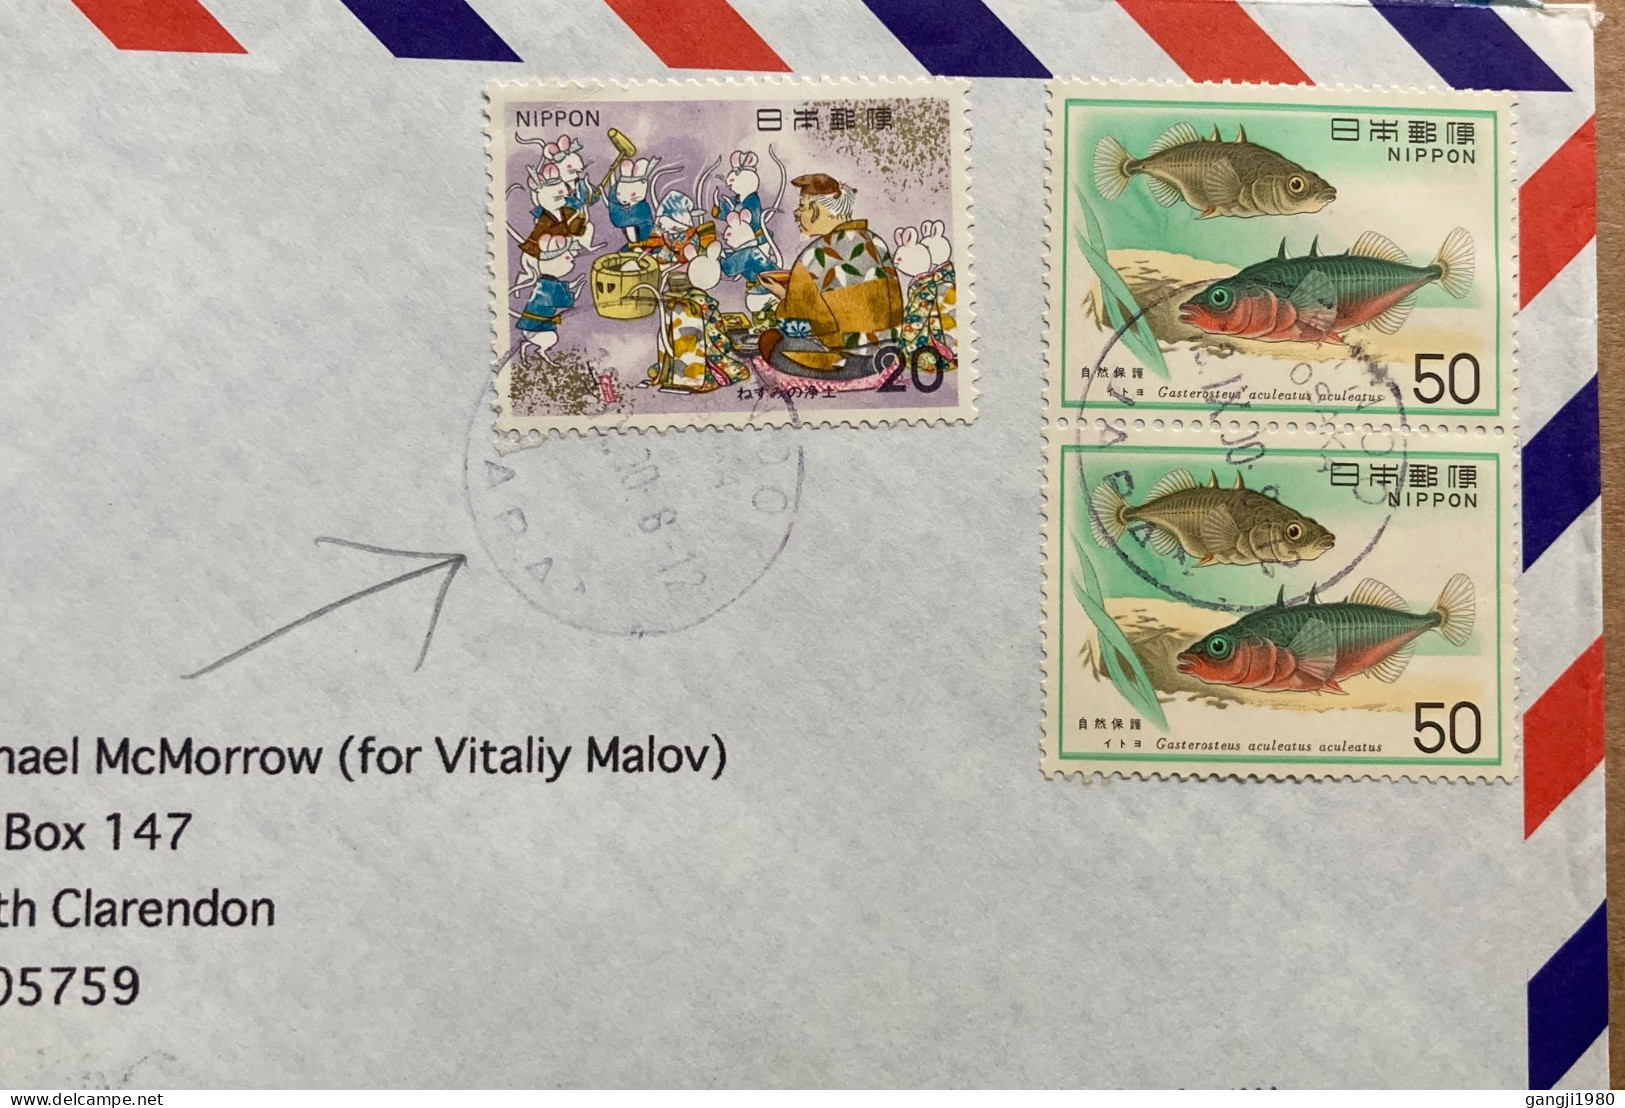 JAPAN 1980, COVER USED TO USA, DISNEY, MICKY MOUSE, FAIRY TALE, CHILDREN STORIES, FISH, 3 STAMP, MINO CITY CANCEL. - Briefe U. Dokumente